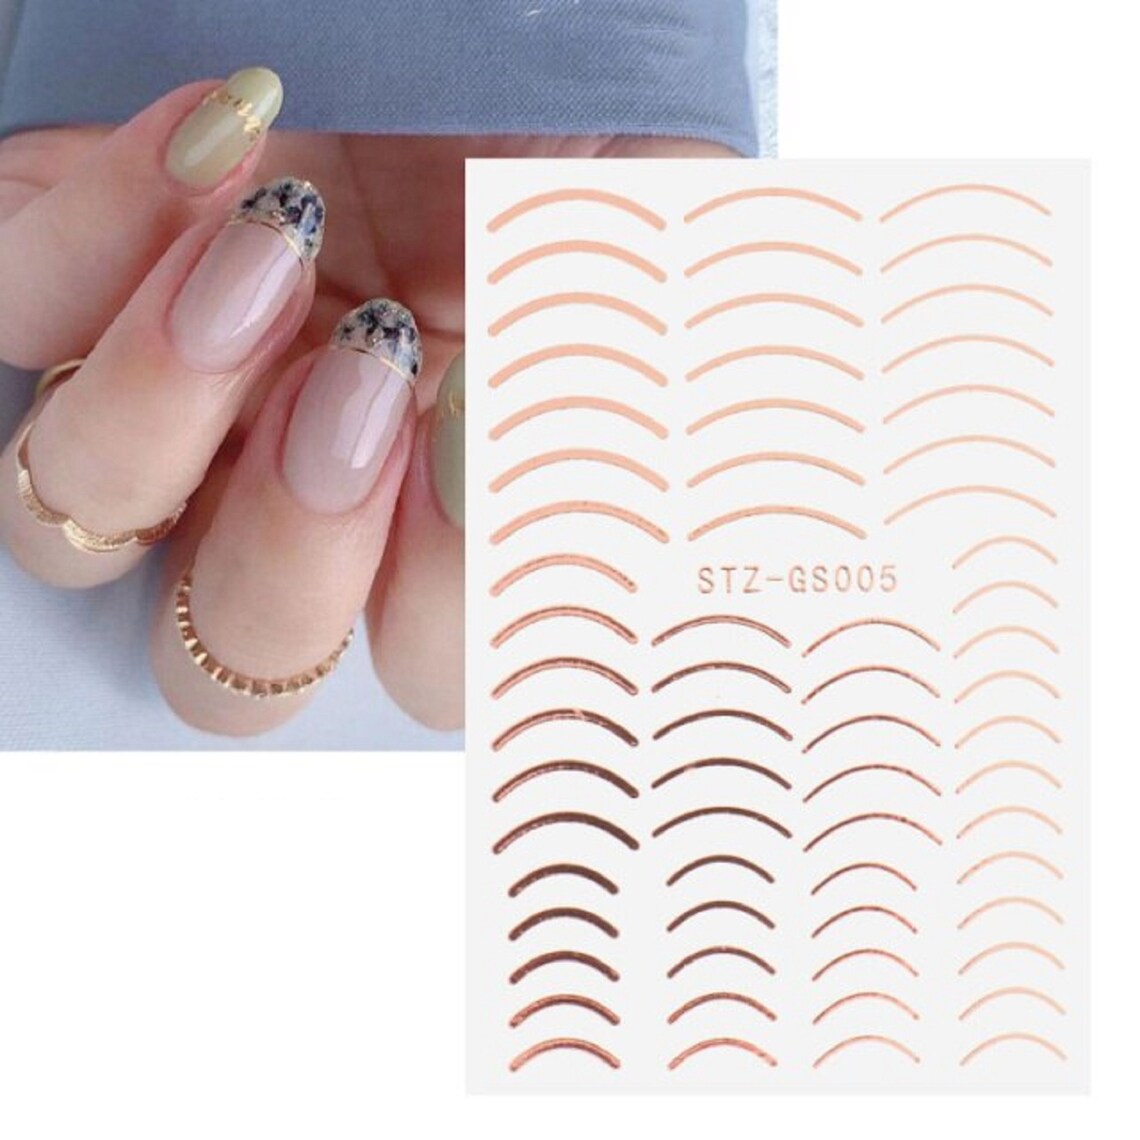 Nail Art Stickers Transfers Decals Metallic Rose Gold Lace - Etsy